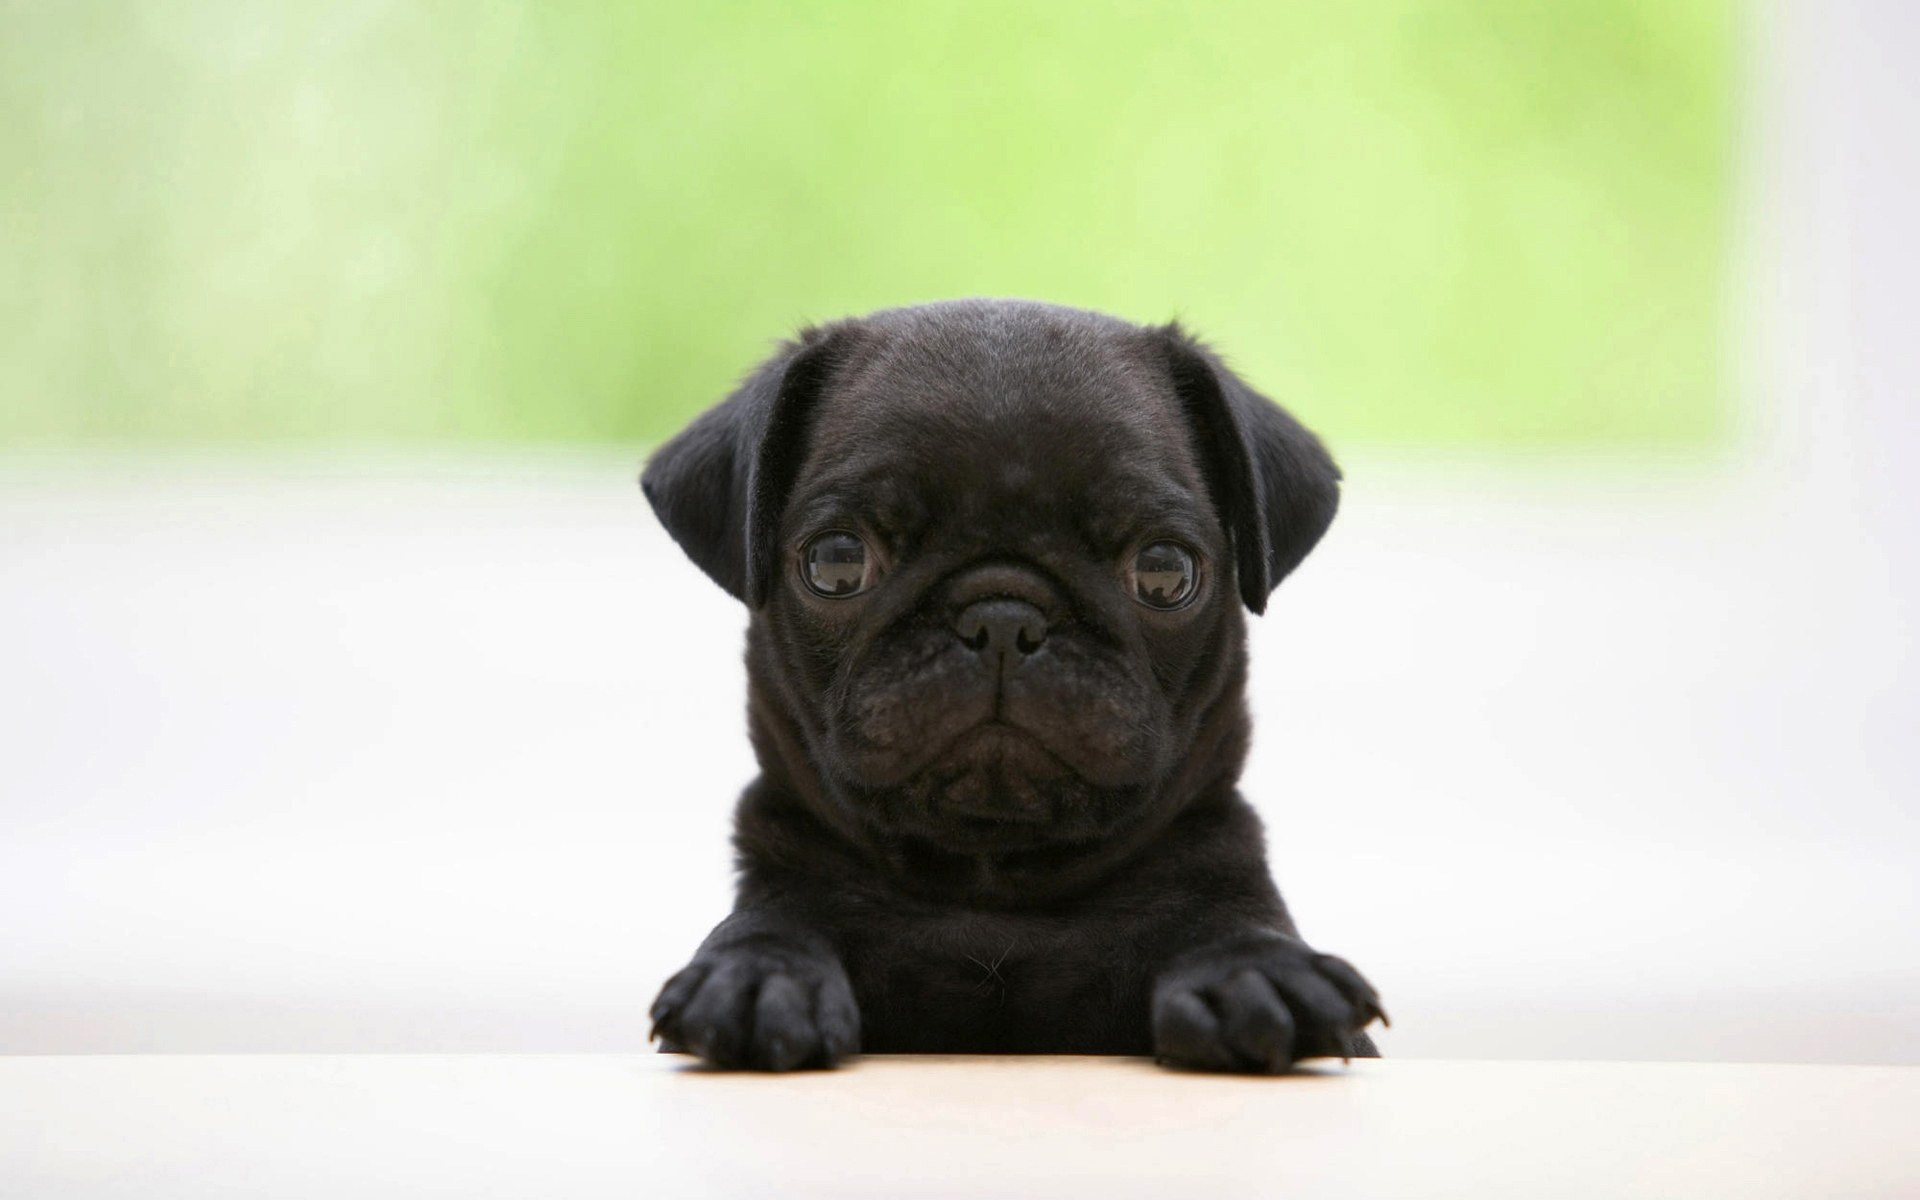 Black Pug Puppy Back To Wallpaper Home